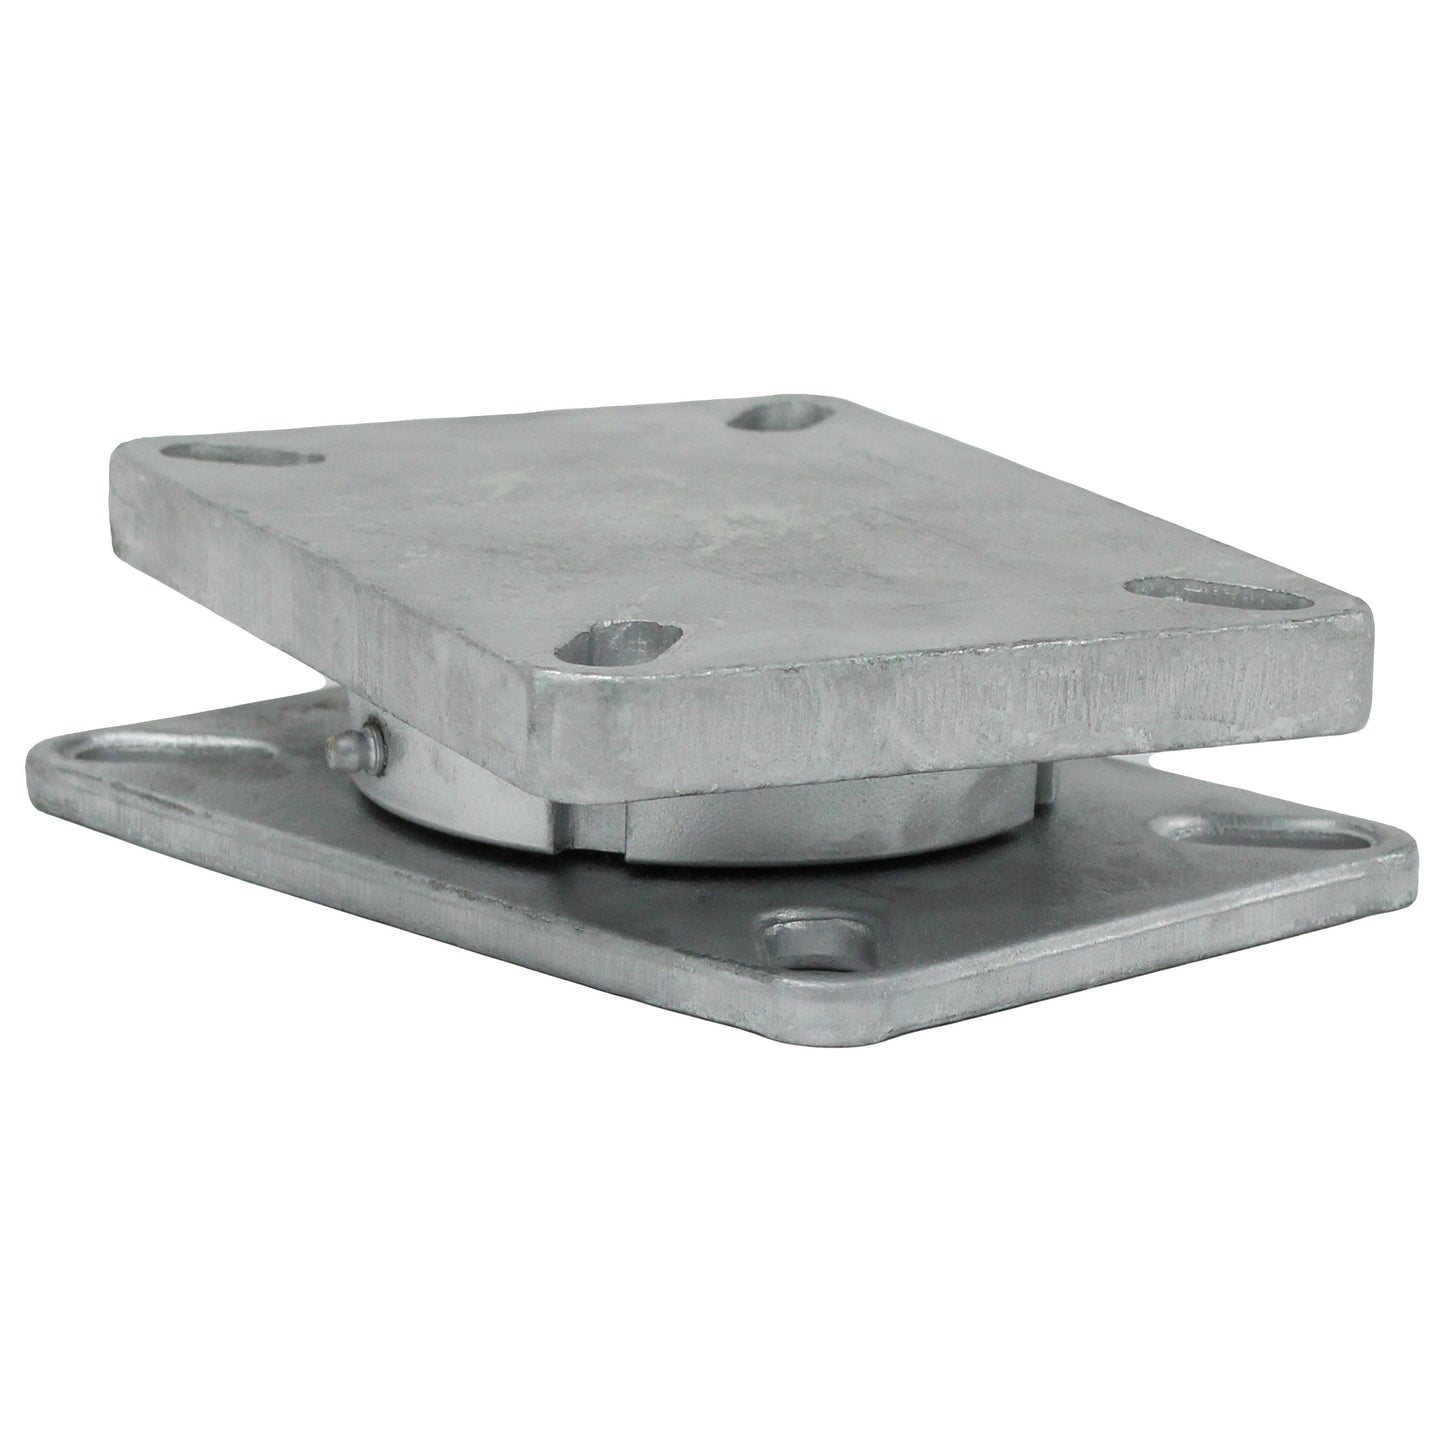 Kingpinless Turntable Caster Mount Plates 4-1/2" x 6-1/4" - 7,000 lbs. Capacity - Durable Superior Casters